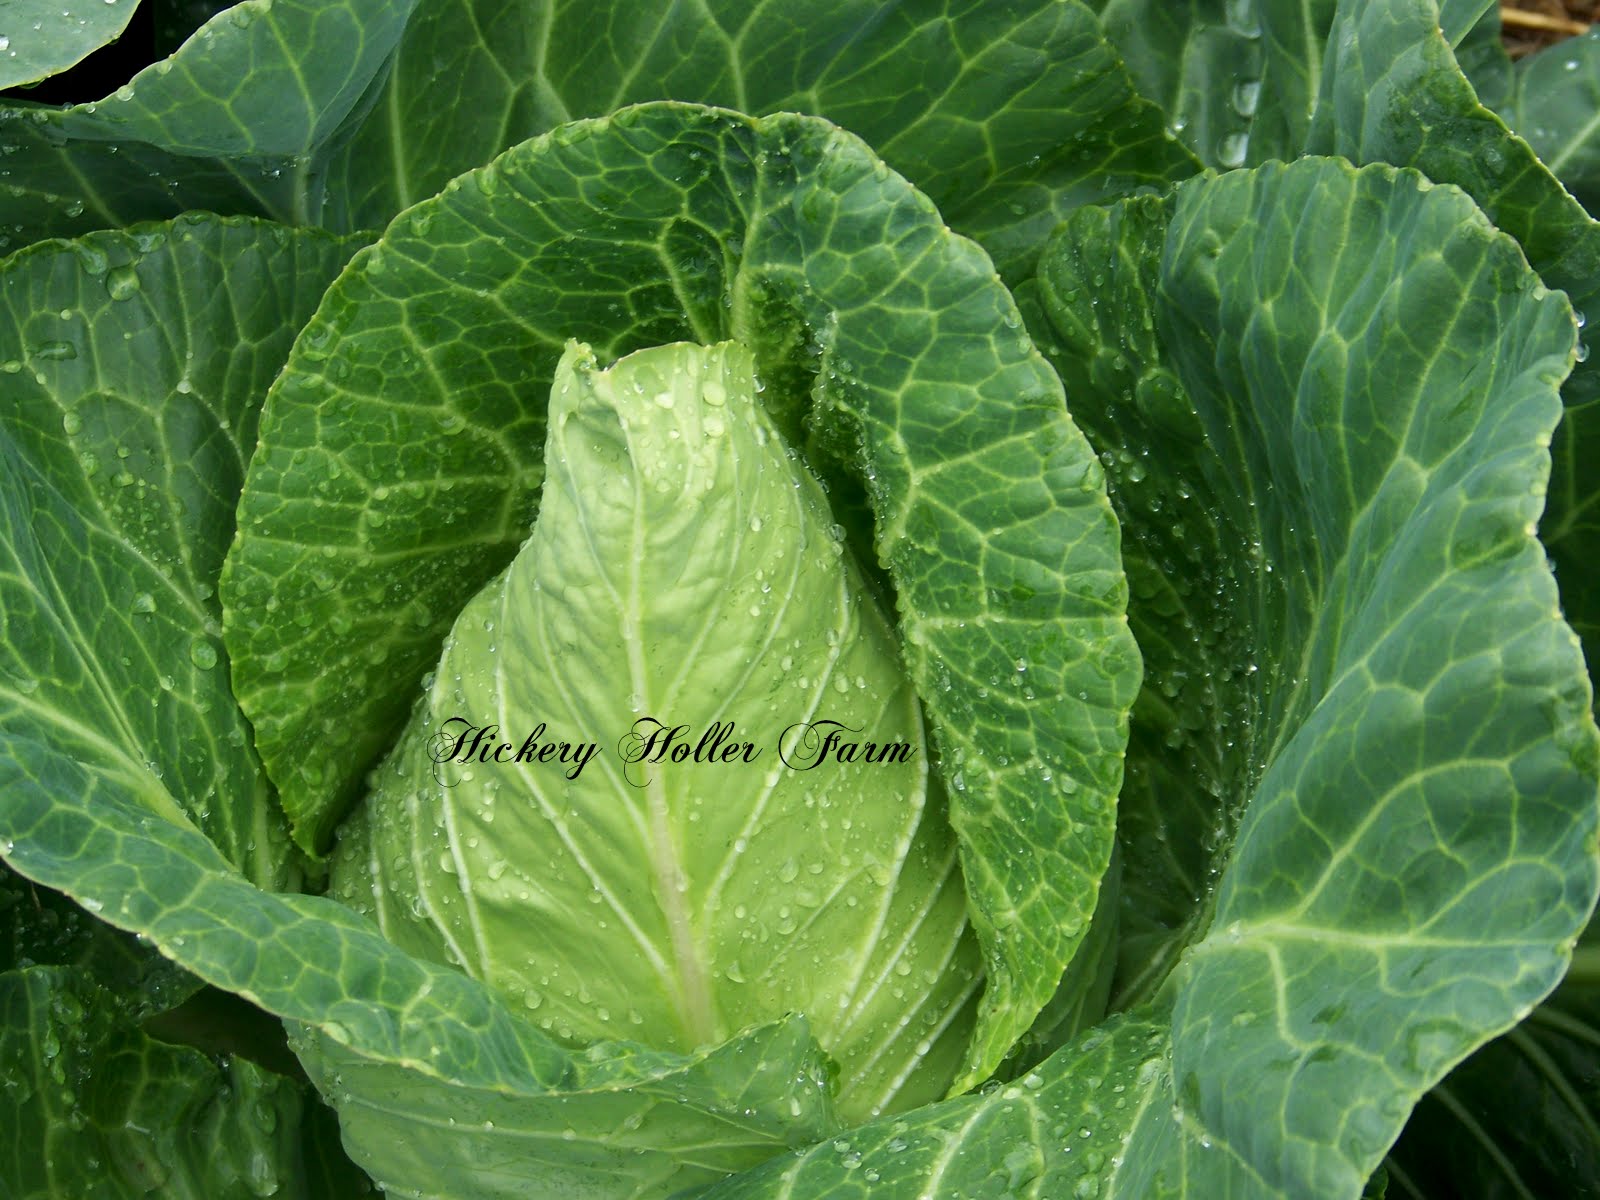 Hickery Holler Farm: Early Jersey Wakefield Cabbage